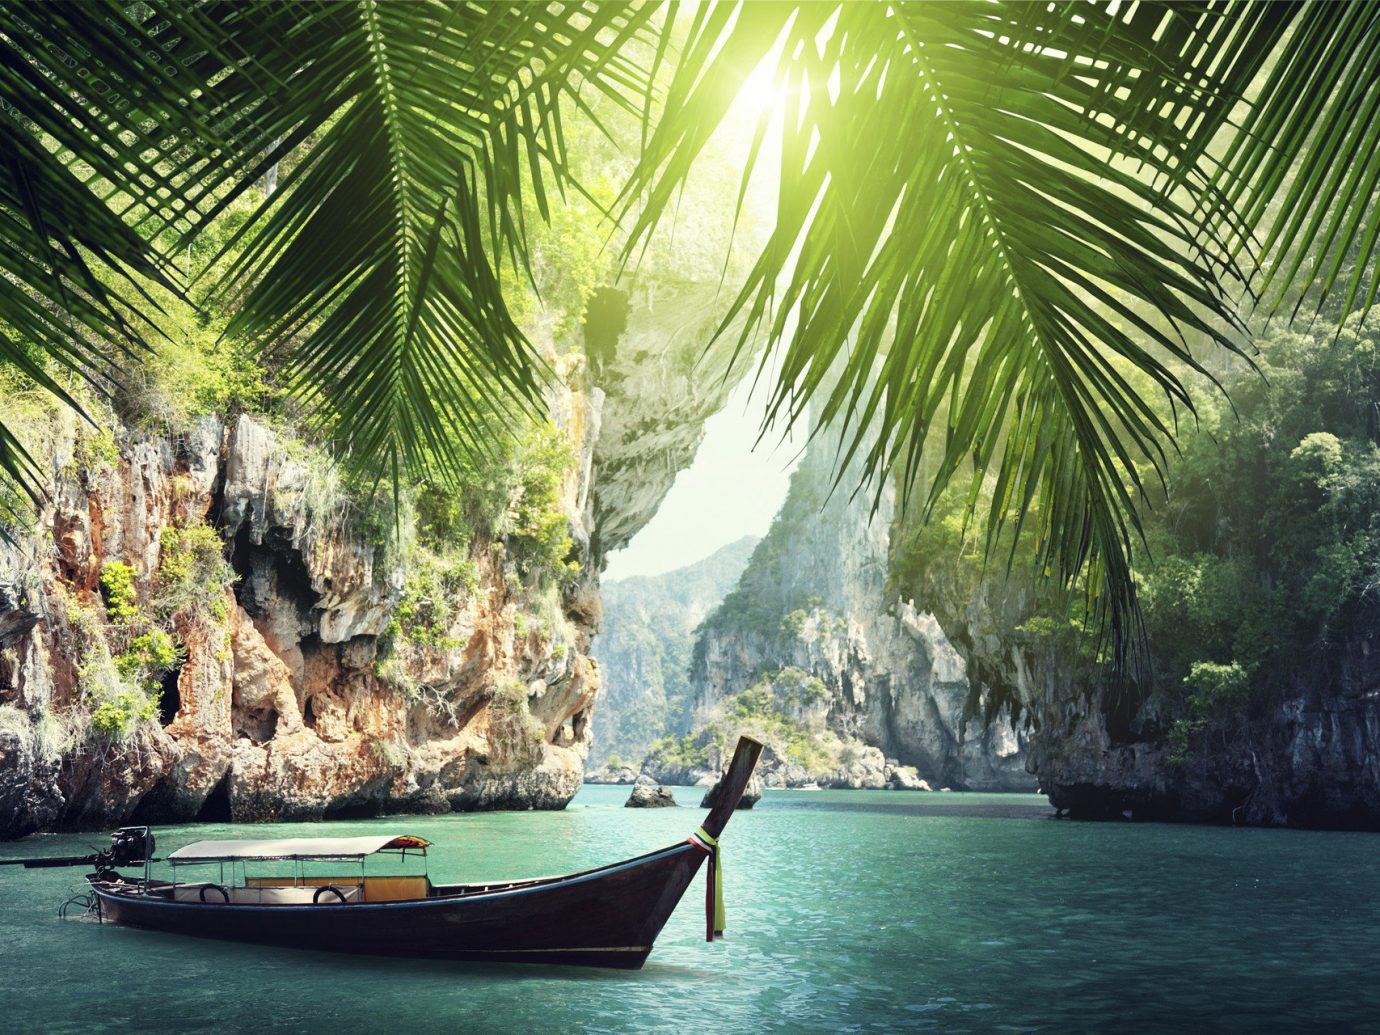 Offbeat water outdoor Boat green tree tropics plant Jungle arecales vehicle sunlight palm family rainforest palm